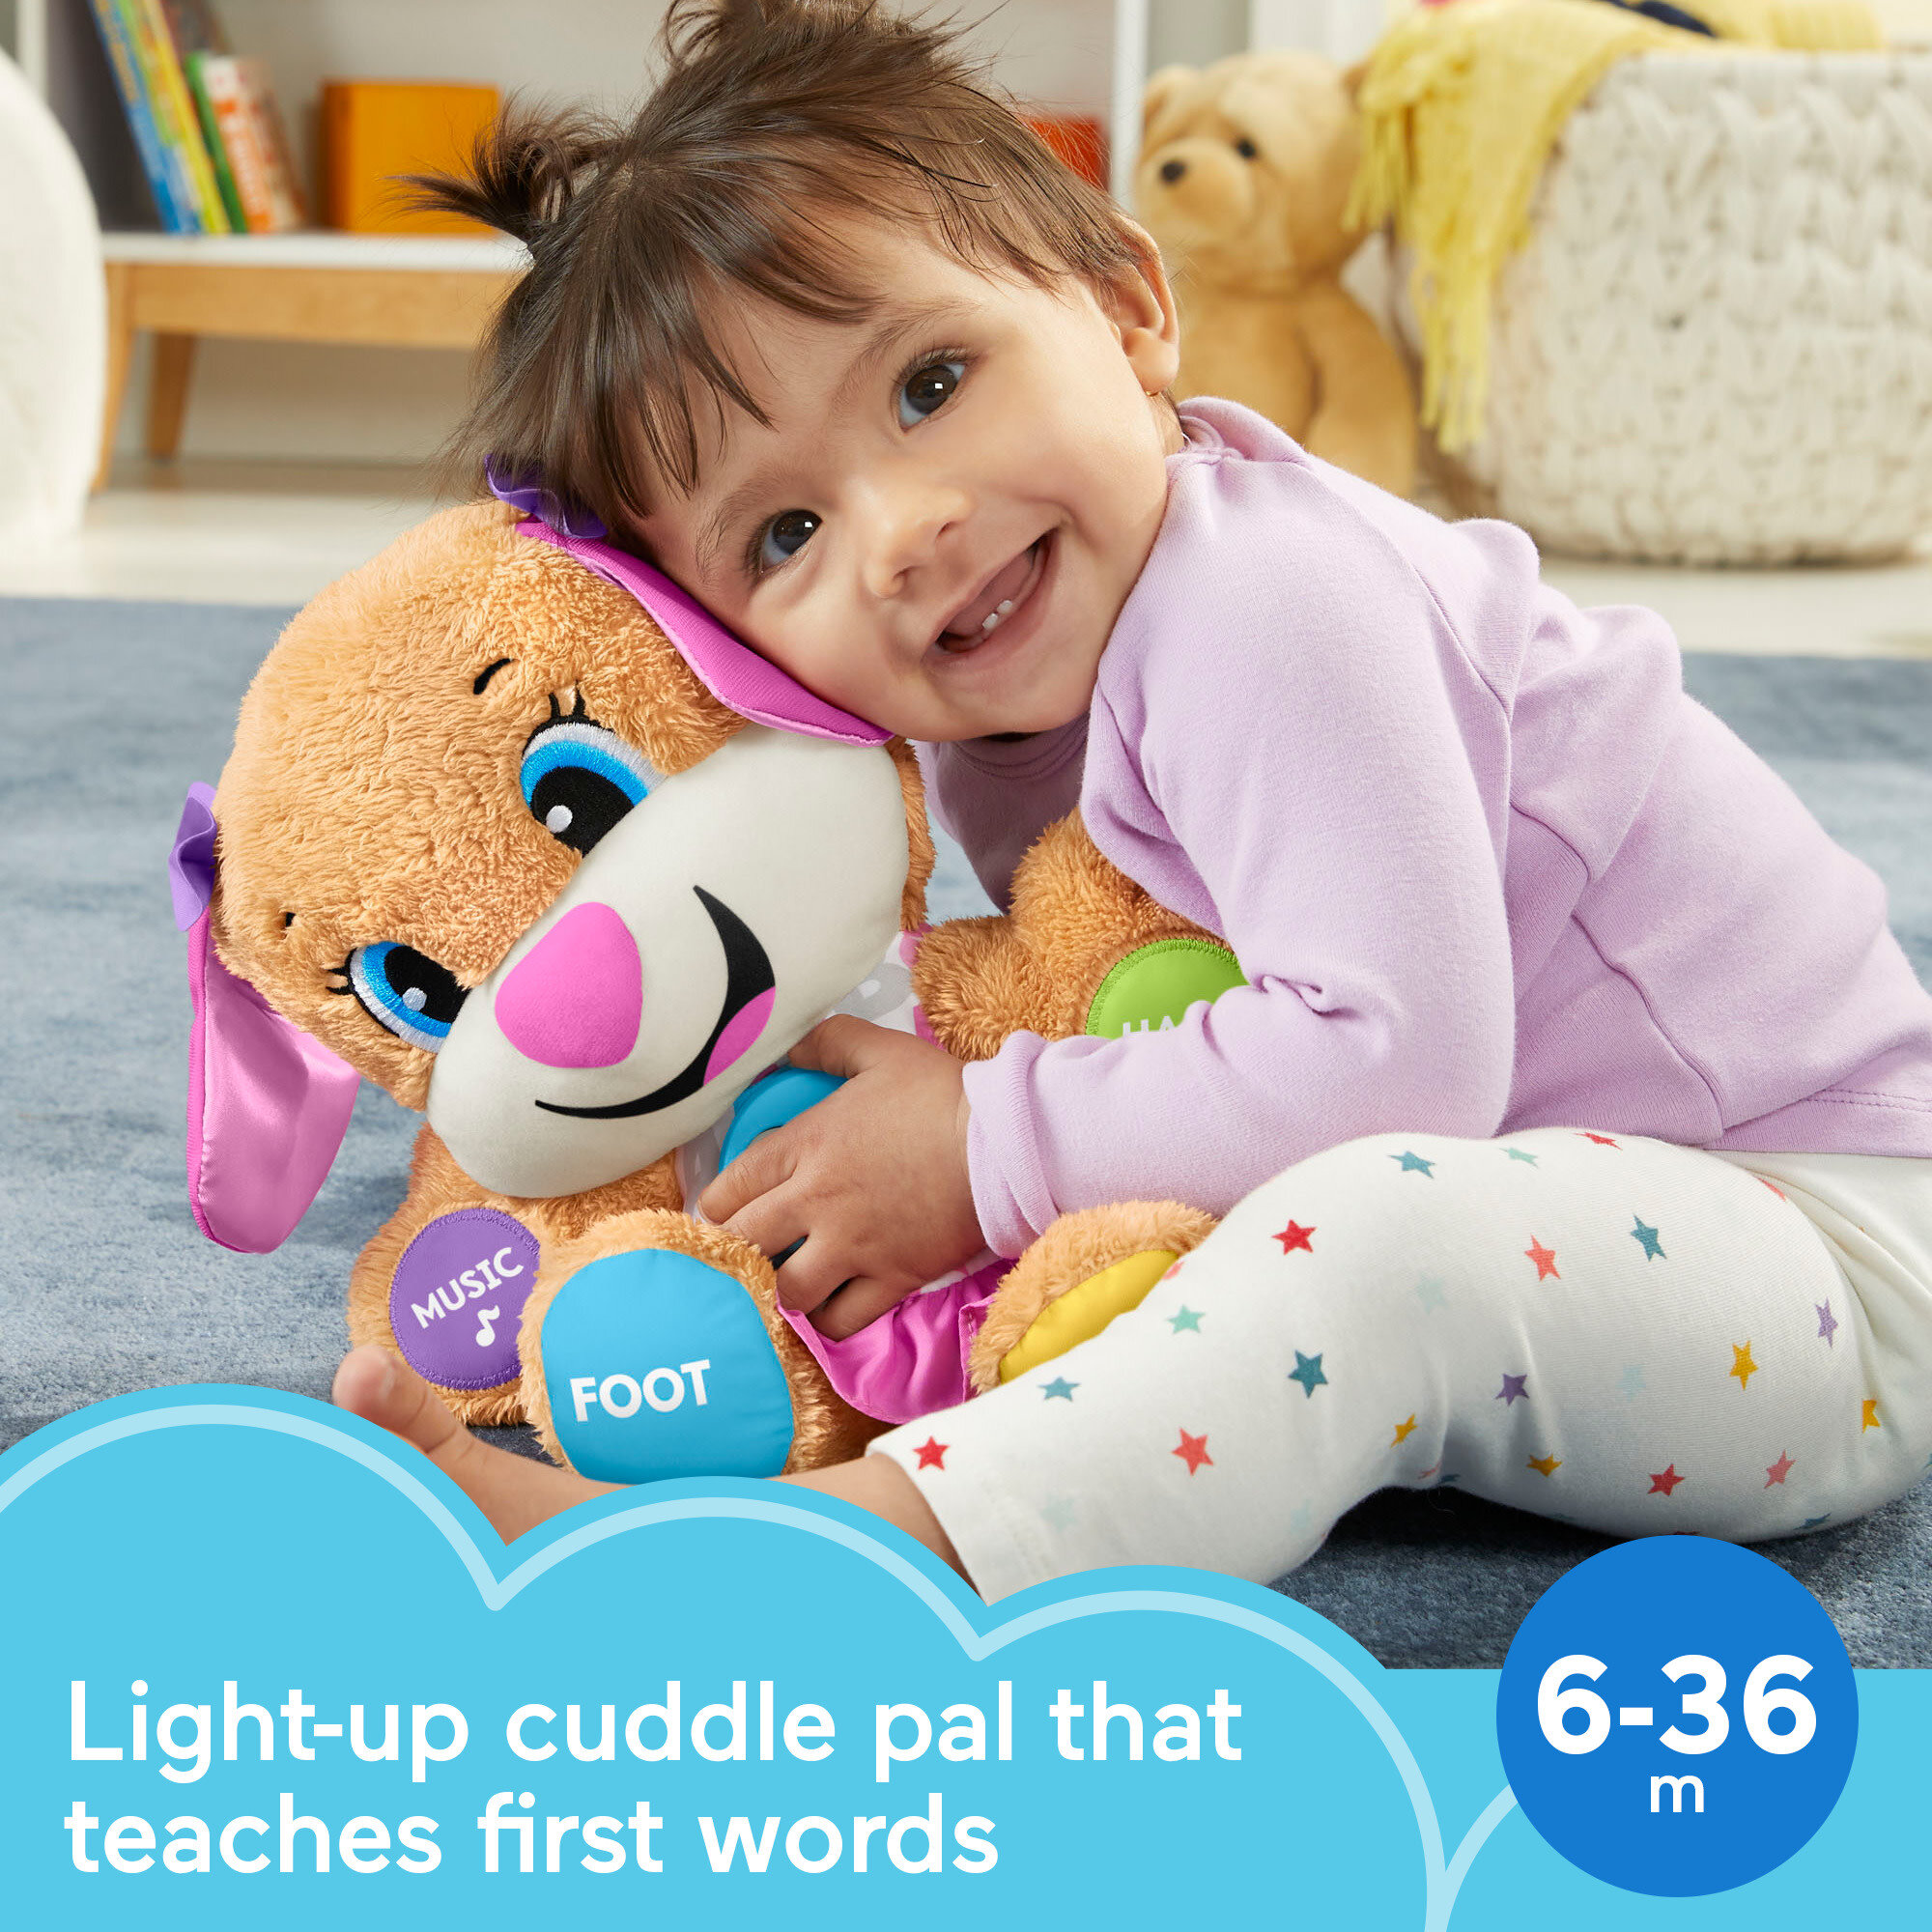 Fisher-Price Laugh & Learn Smart Stages Sis Puppy Plush Learning Toy for Baby, Infants and Toddlers, 6 months and up - image 3 of 8